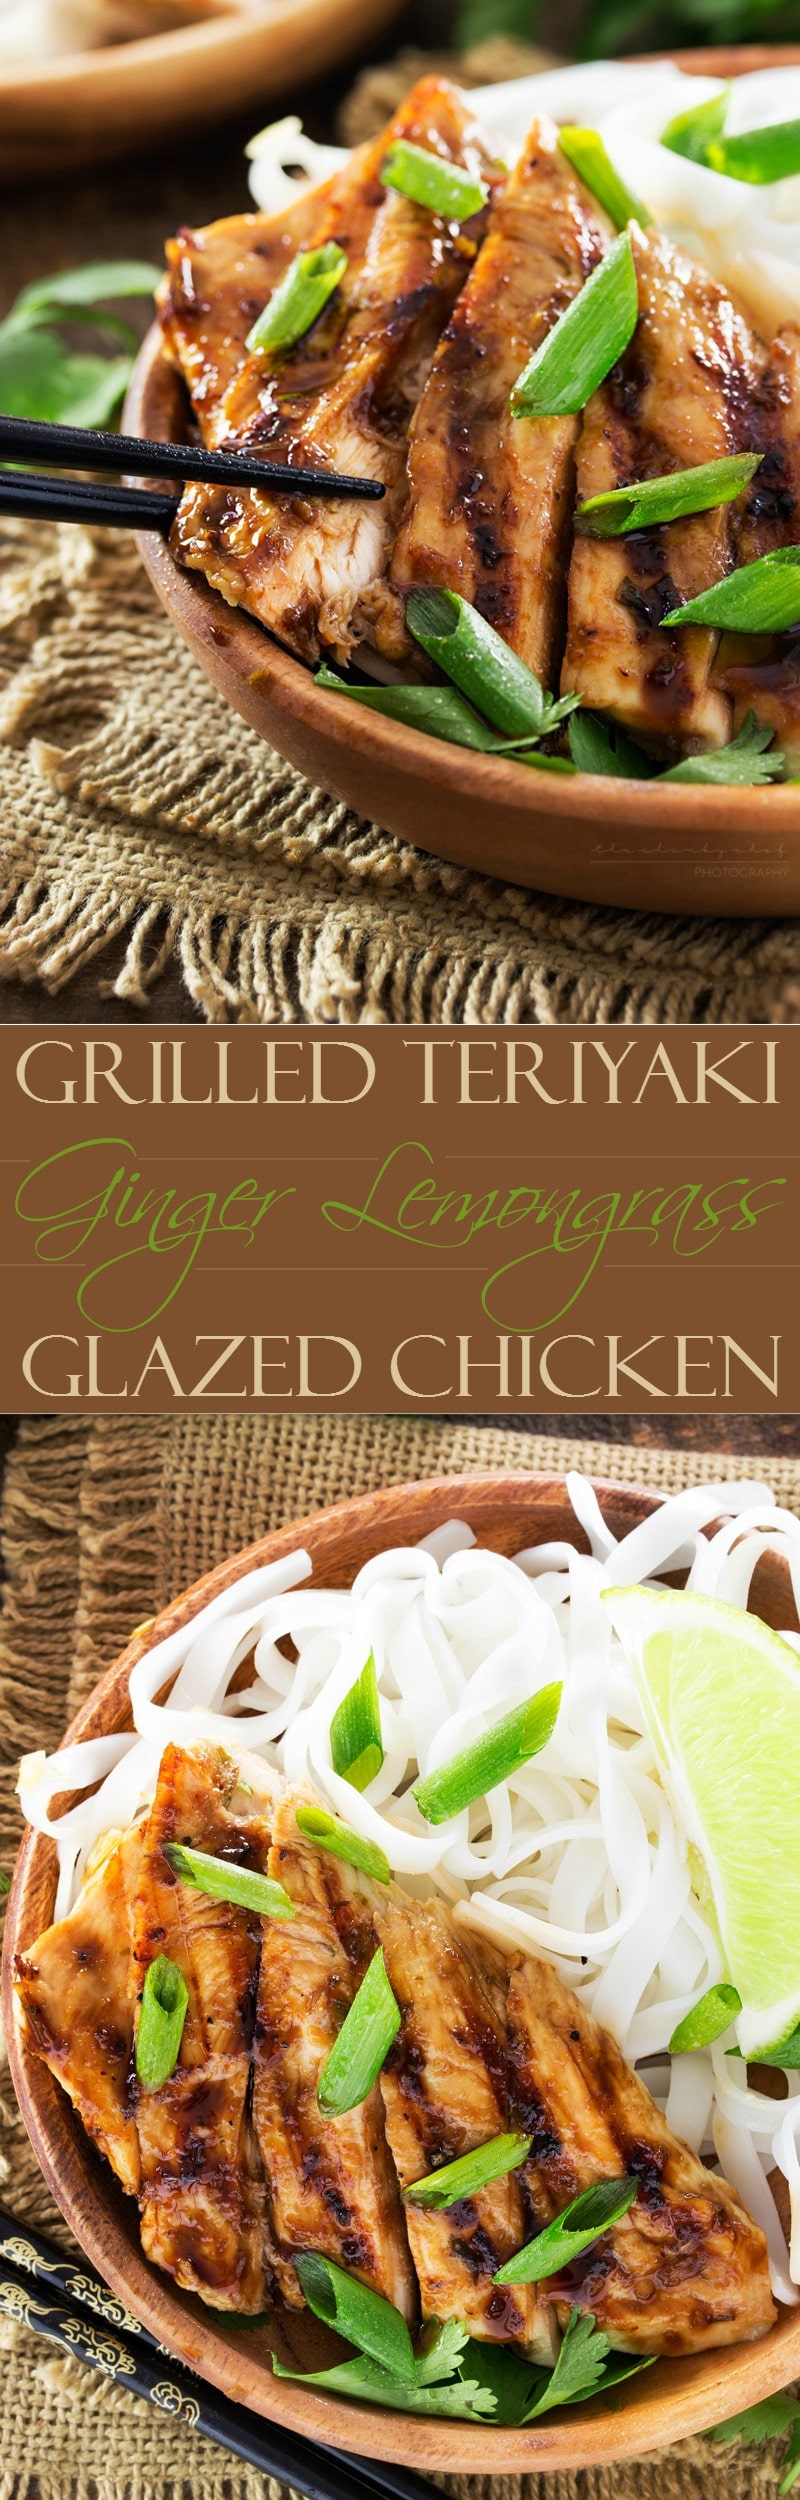 Ginger Lemongrass Teriyaki Grilled Chicken | This ginger lemongrass marinated chicken is grilled to perfection and brushed with a finger licking teriyaki glaze! Eating healthy never tasted so good! | http://thechunkychef.com